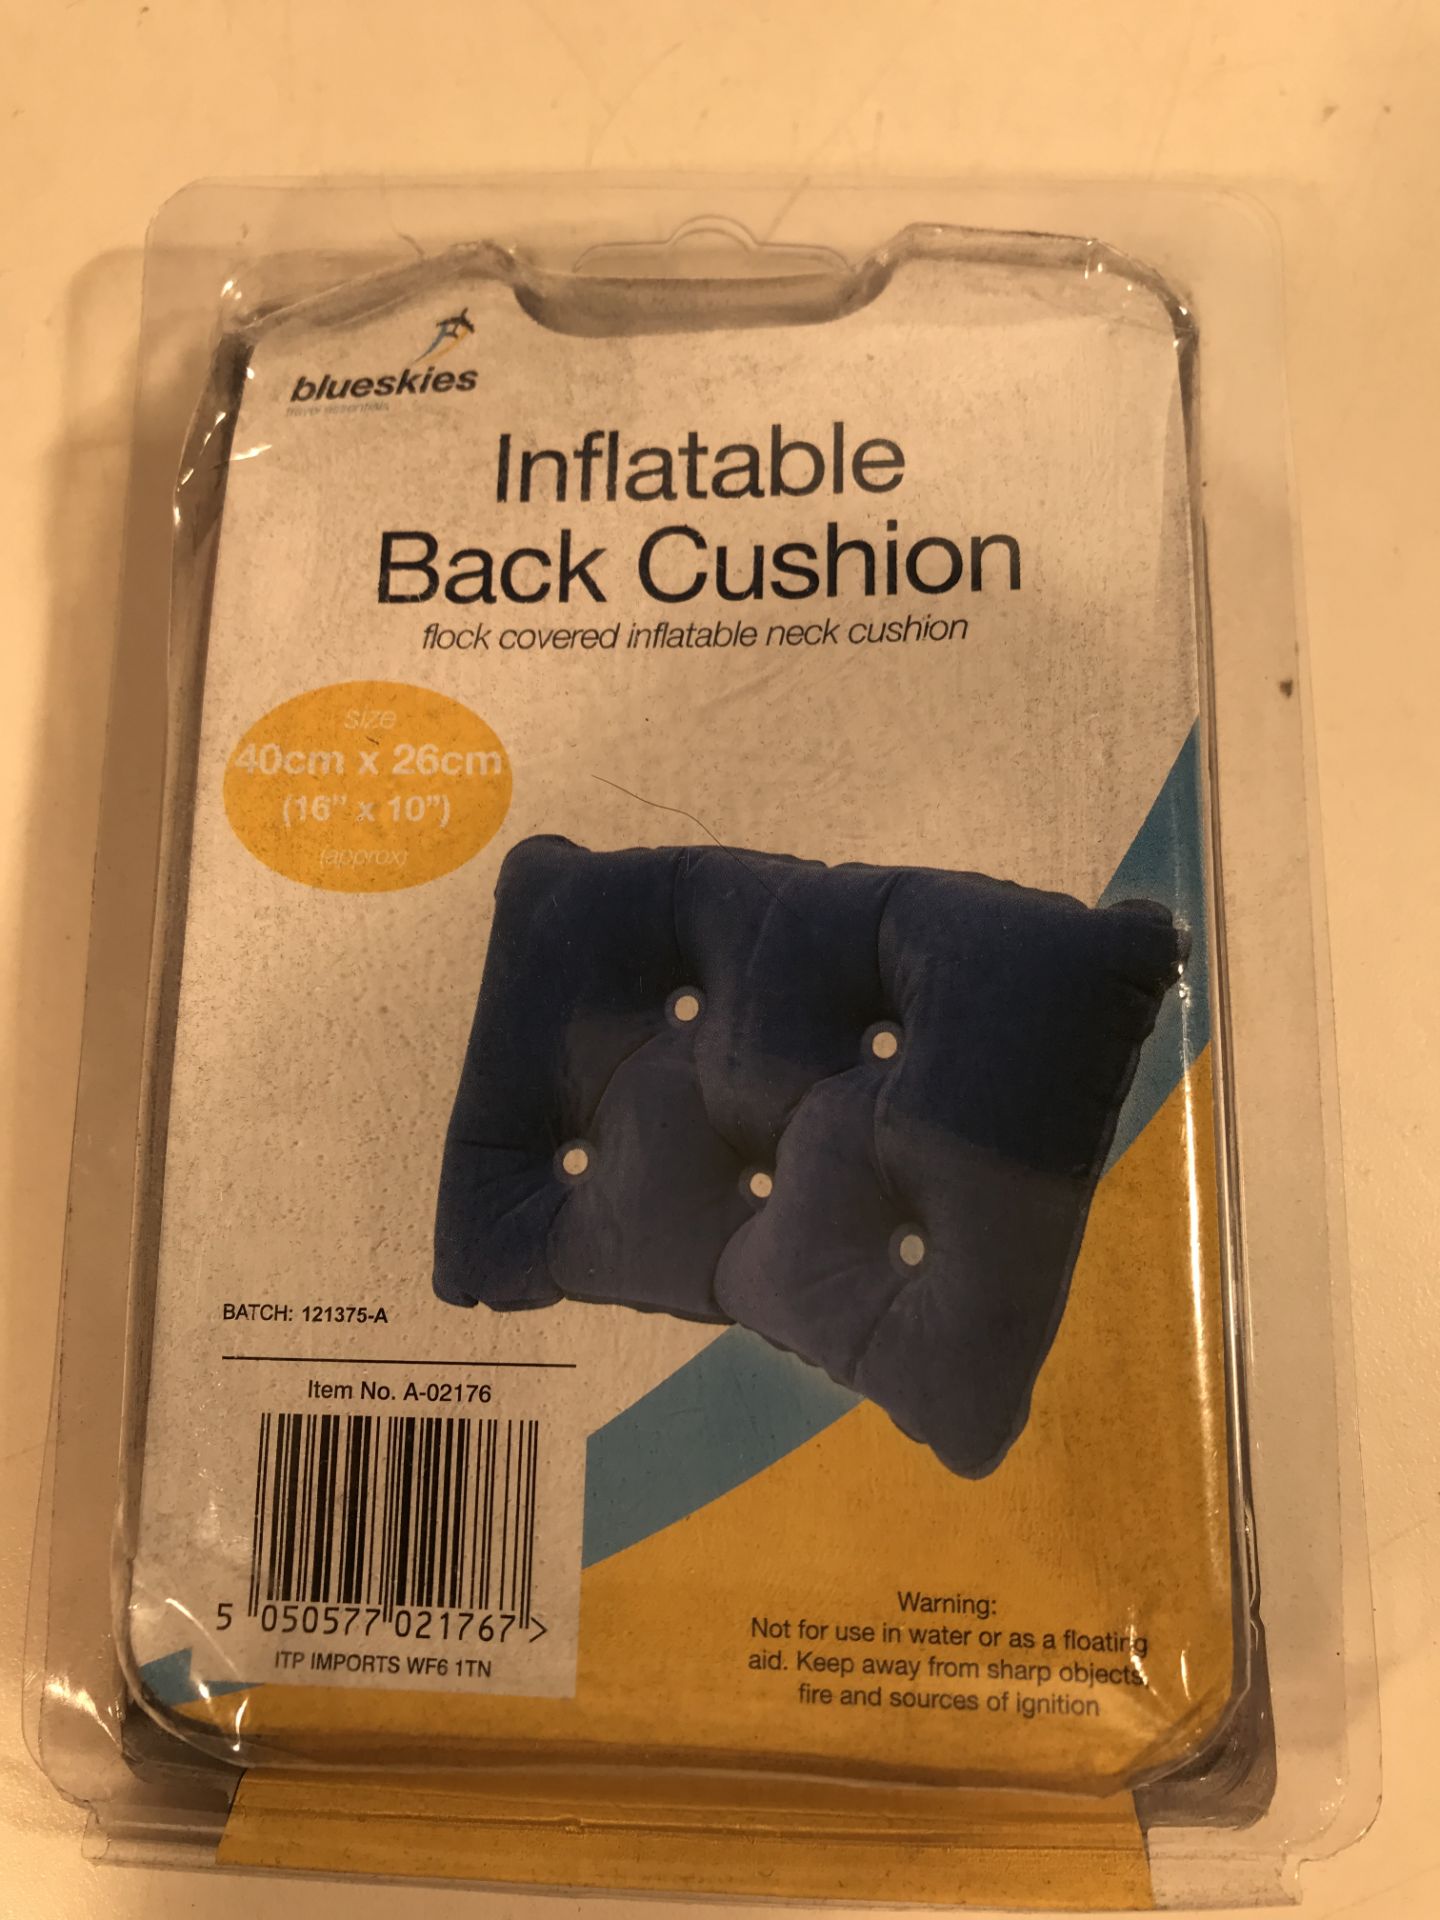 12 x Inflatable Back Cushions - Image 3 of 3